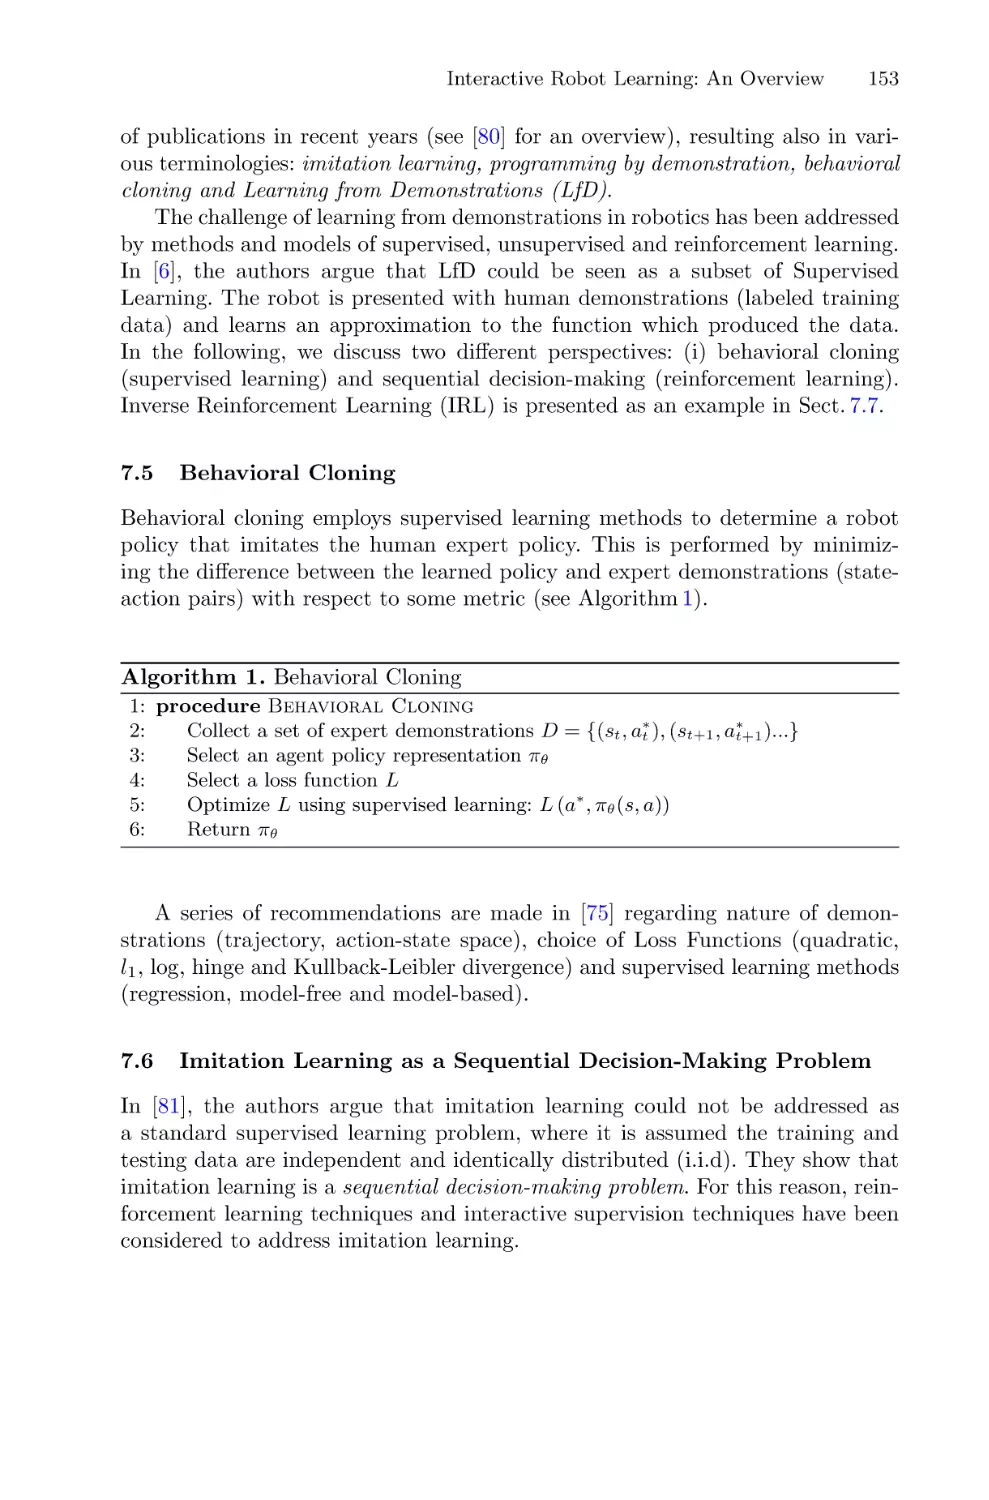 7.5 Behavioral Cloning
7.6 Imitation Learning as a Sequential Decision-Making Problem